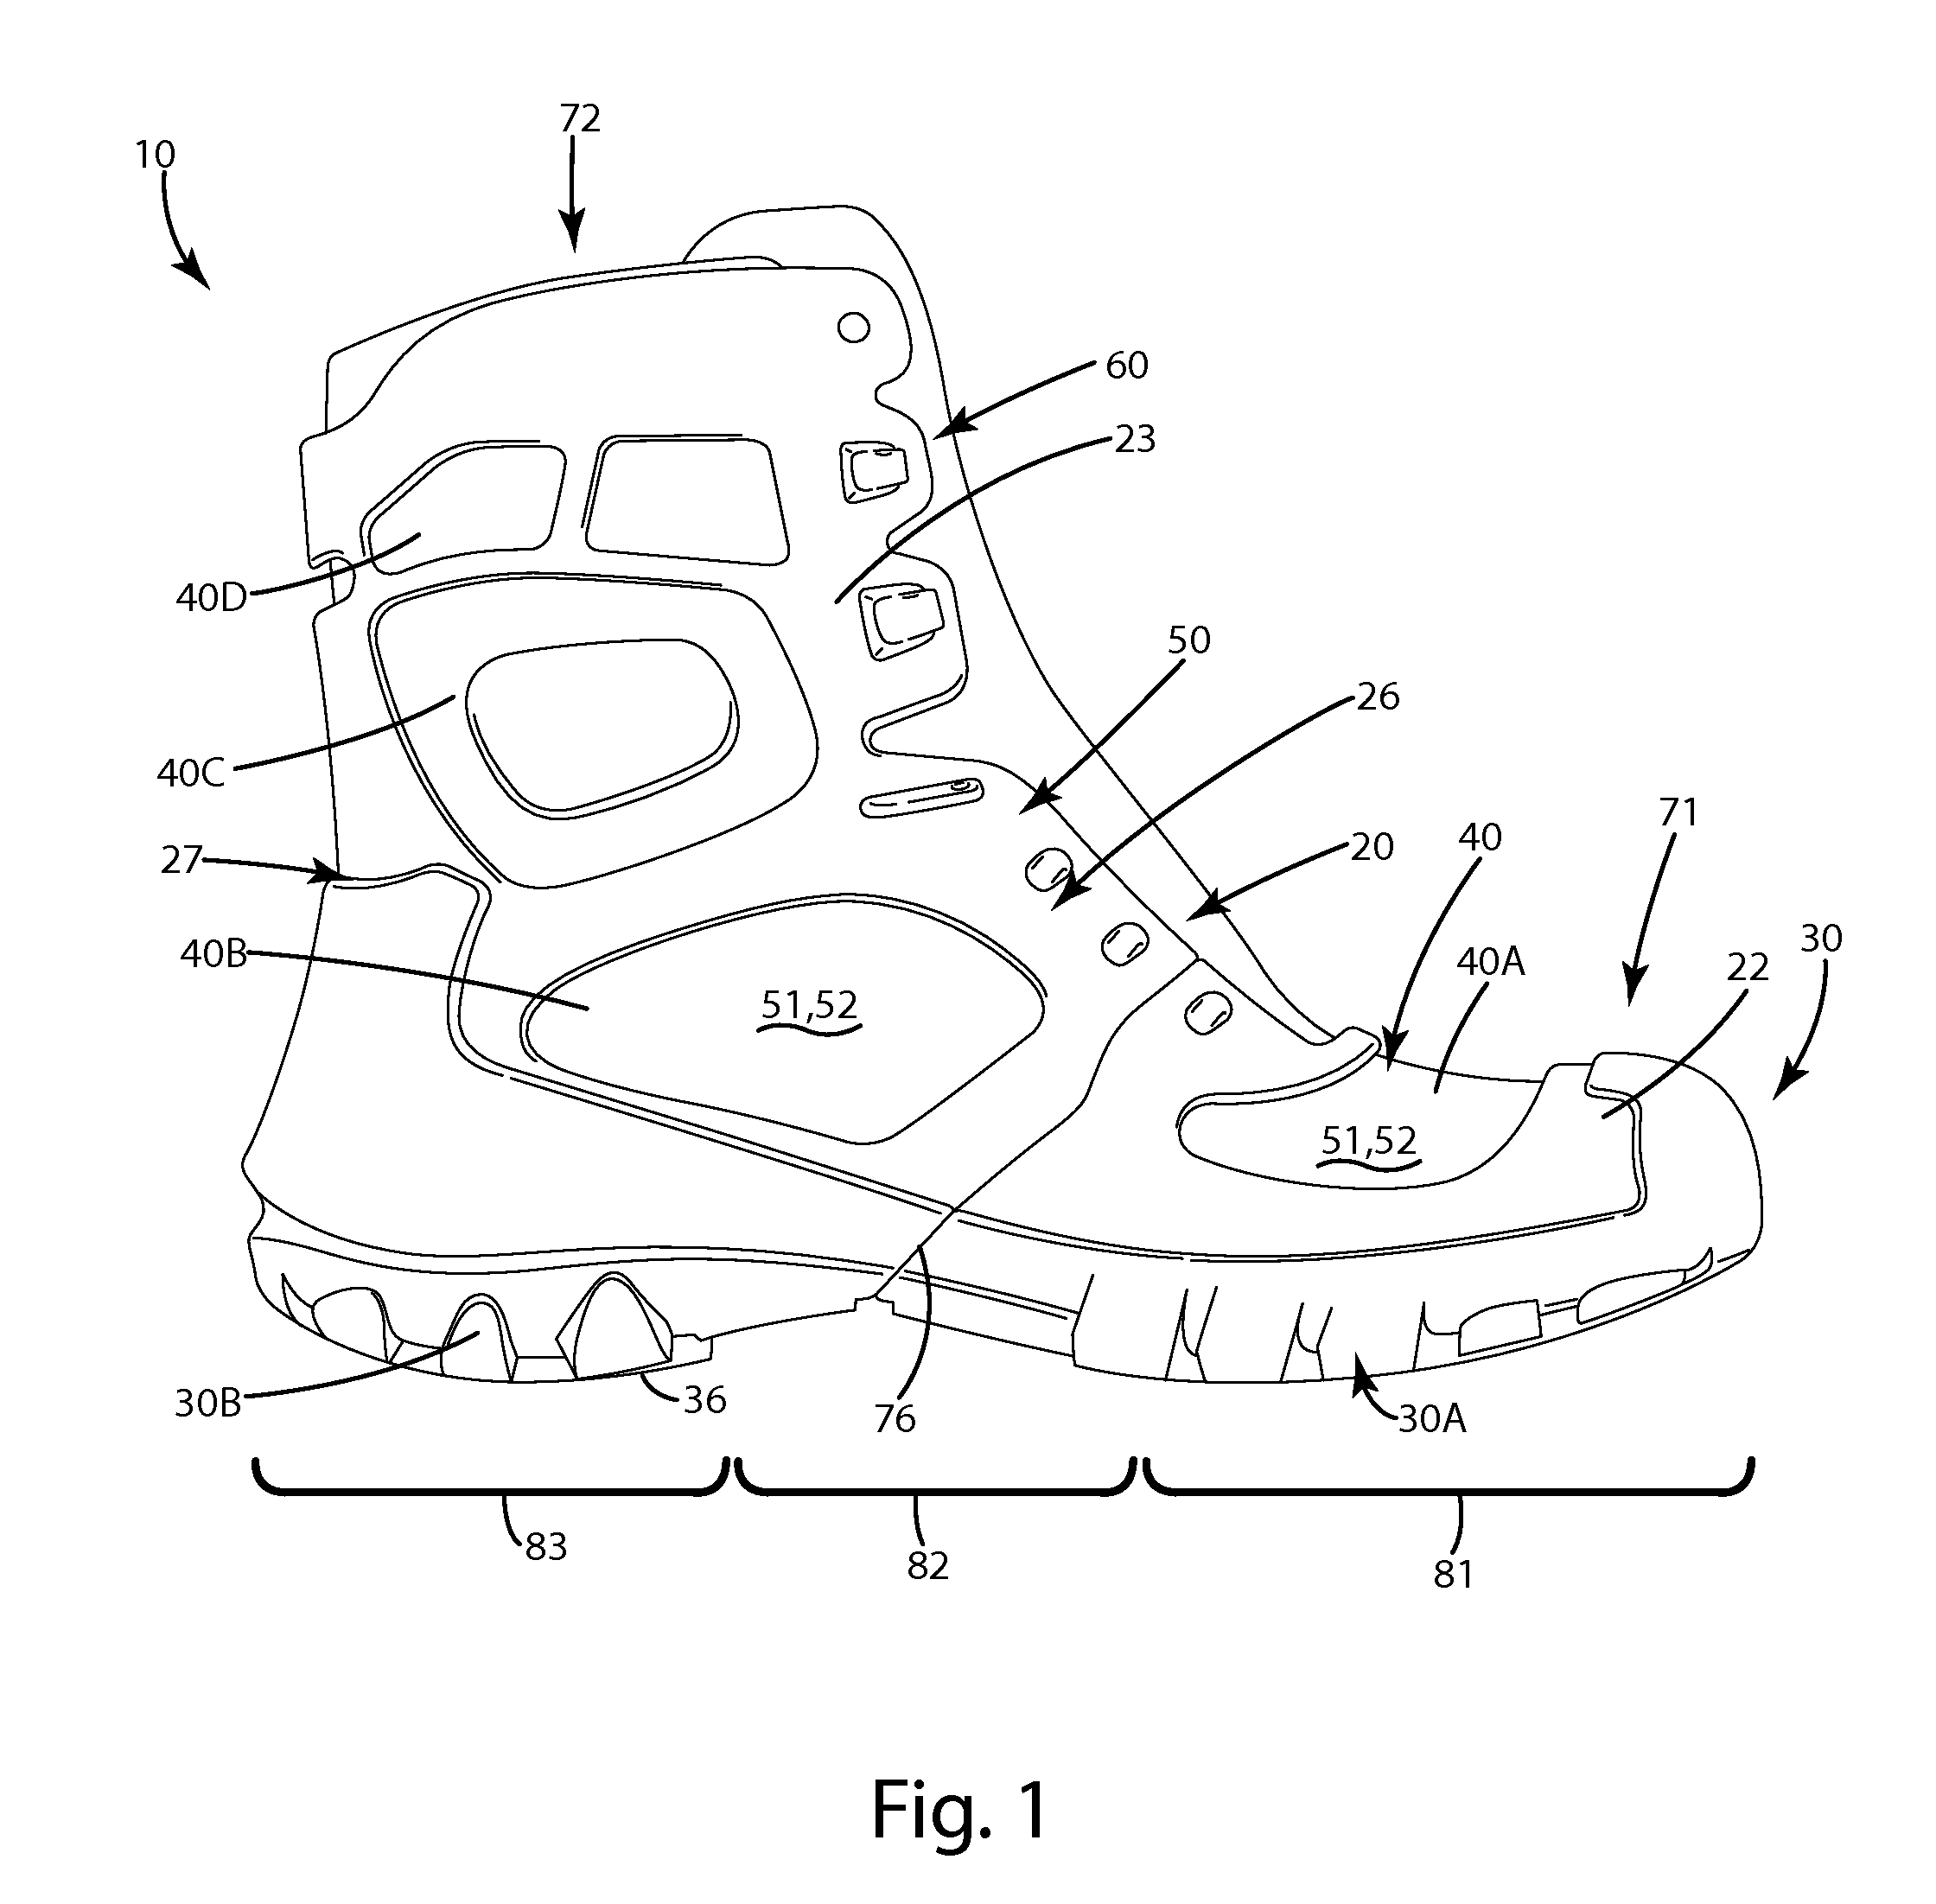 Injection molded footwear and related method of manufacture